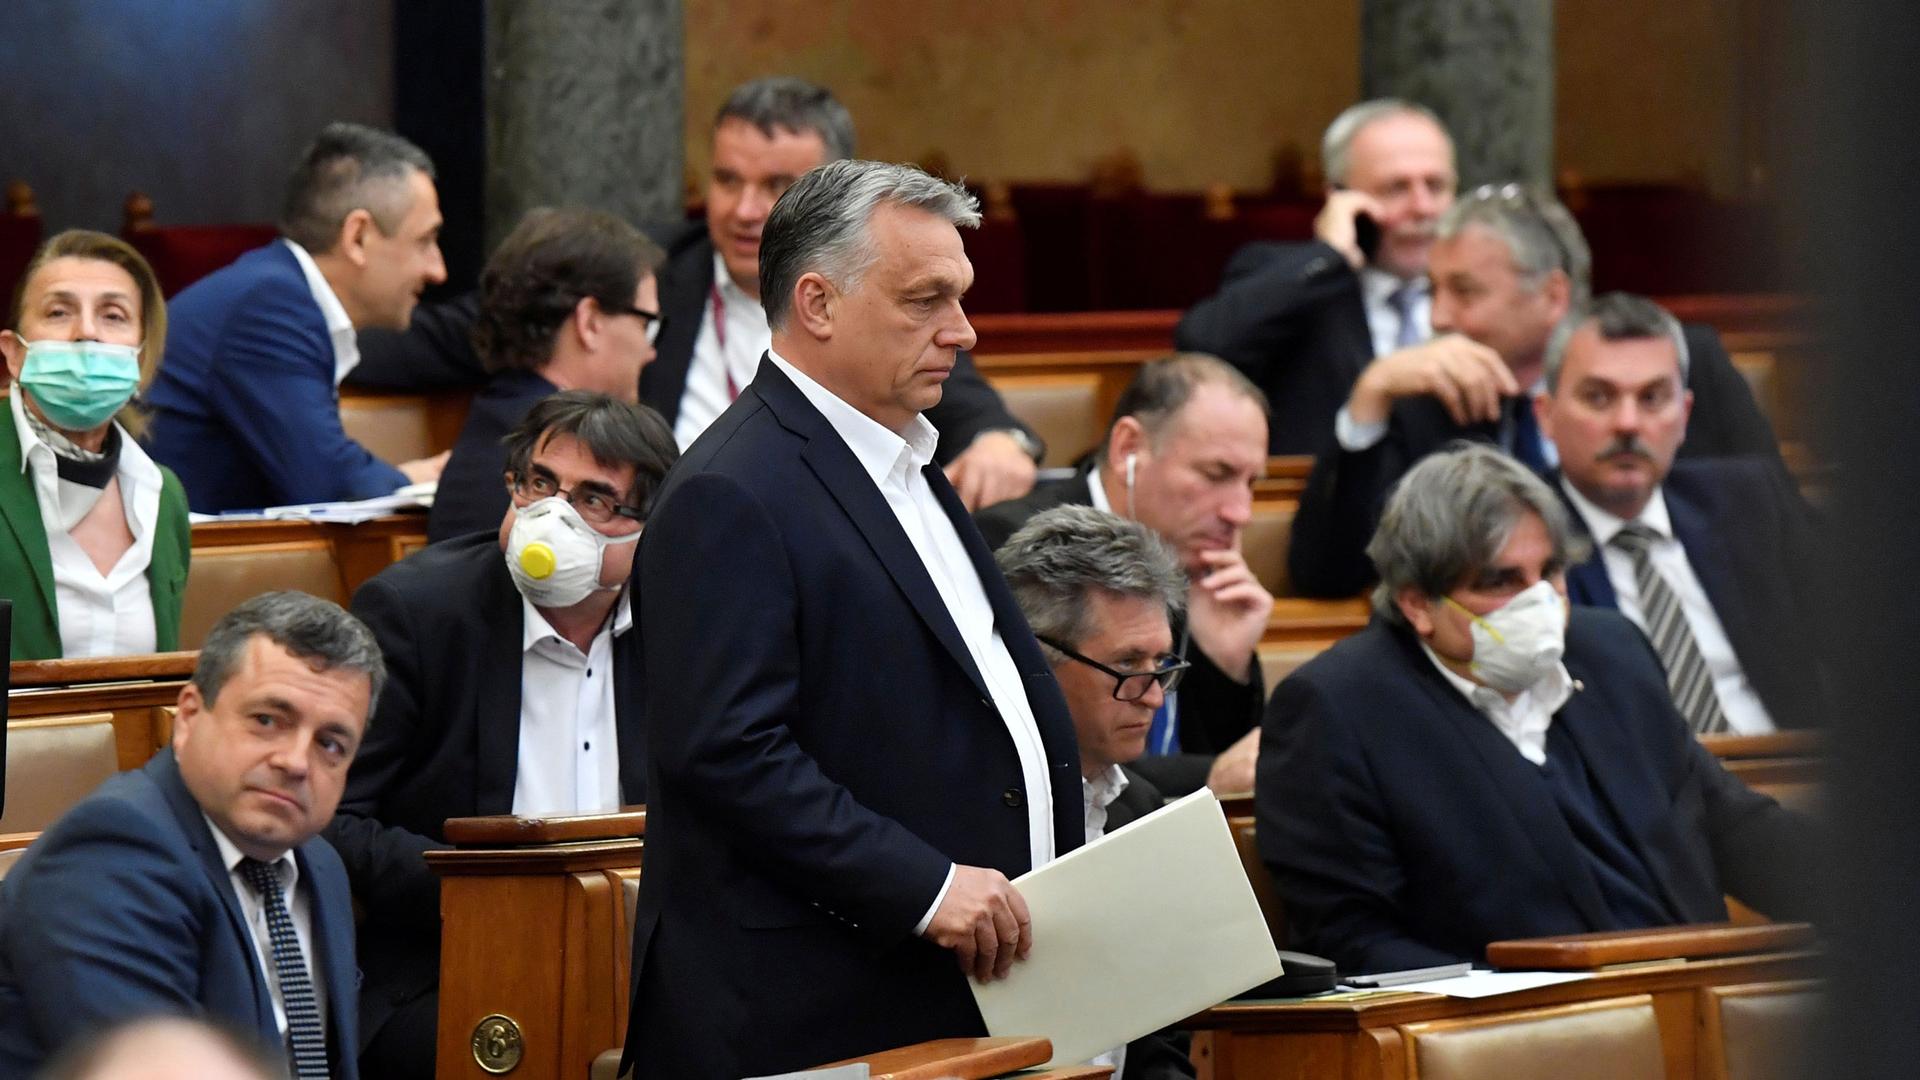 Hungarian Prime Minister Viktor Orban is shown standing among lawmakers and wearing a dark suit jacket.